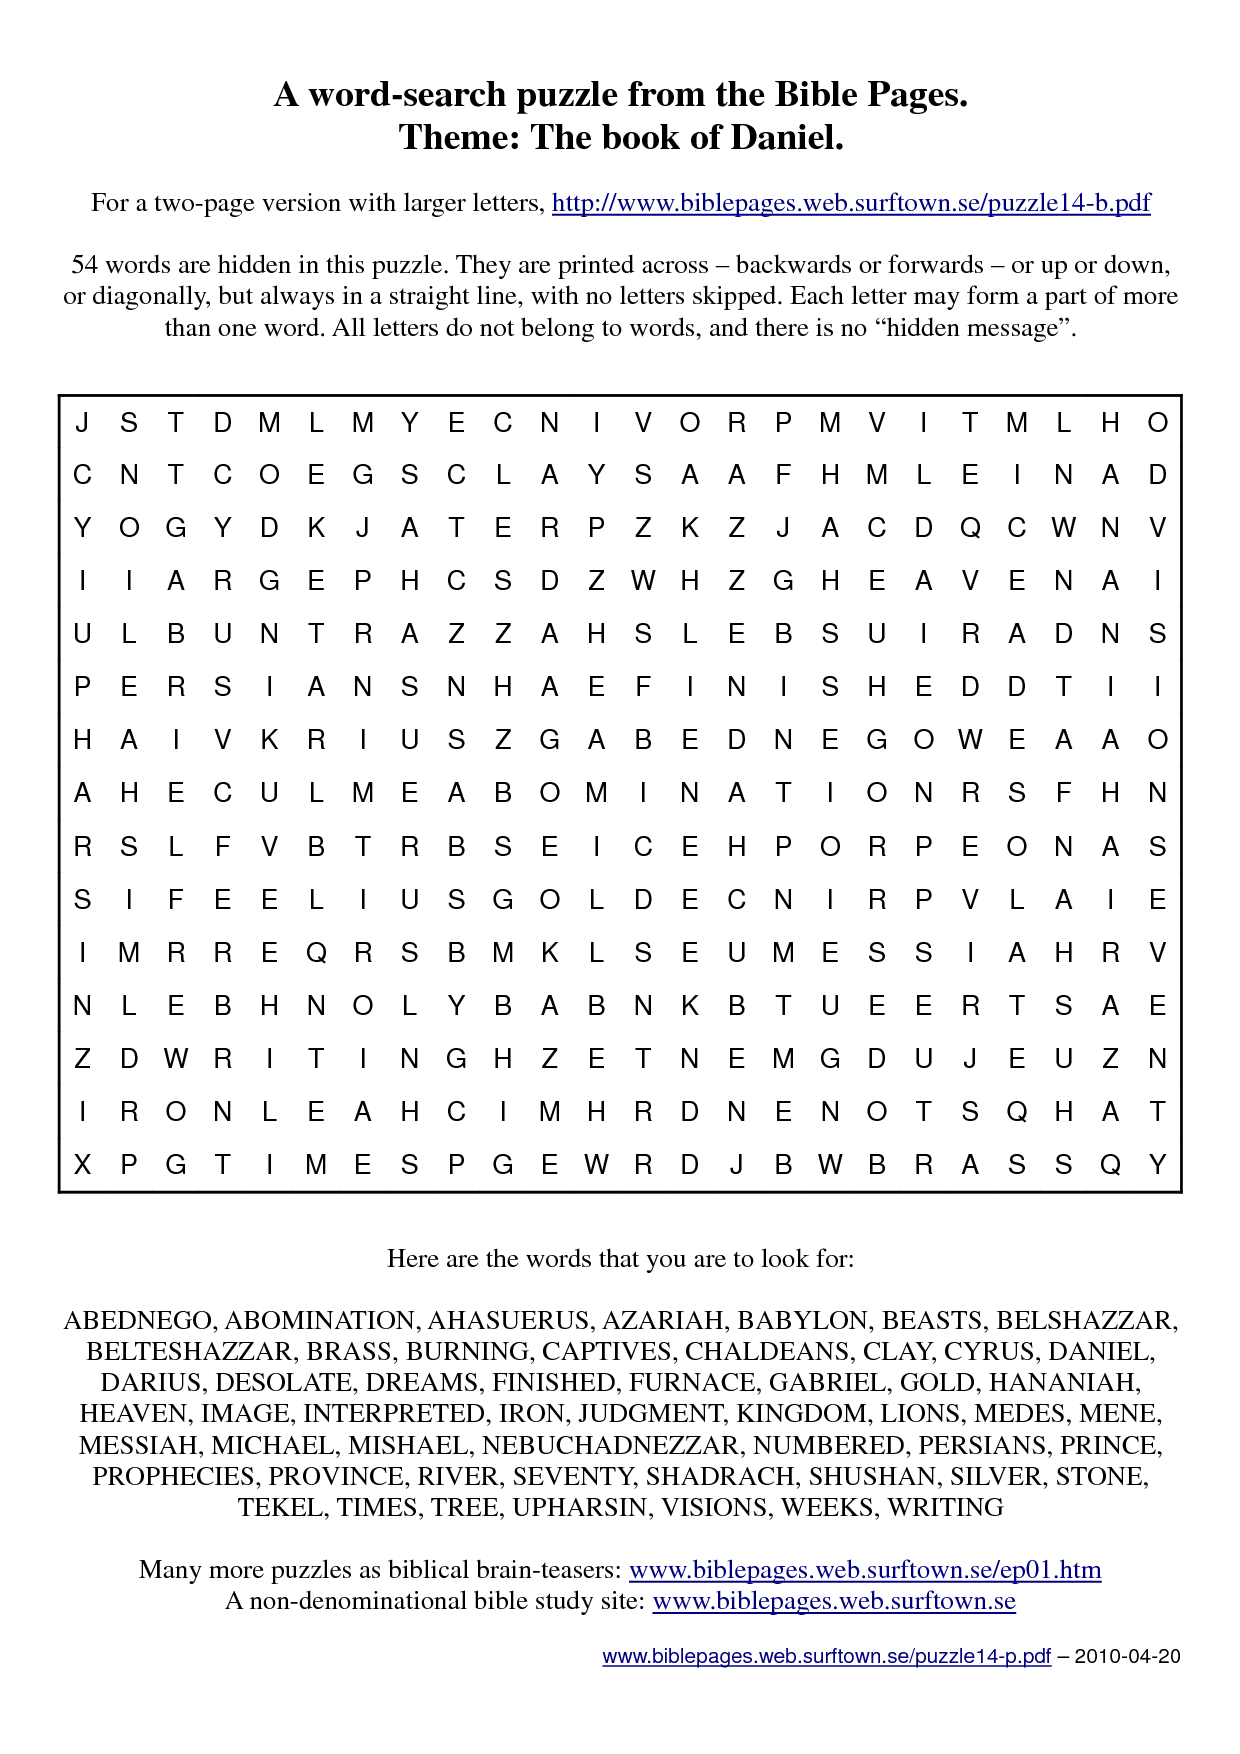 The Book Of Daniel - A Word-Search Puzzle | Religious Ed. | Book Of - Christian Word Search Puzzles Free Printable